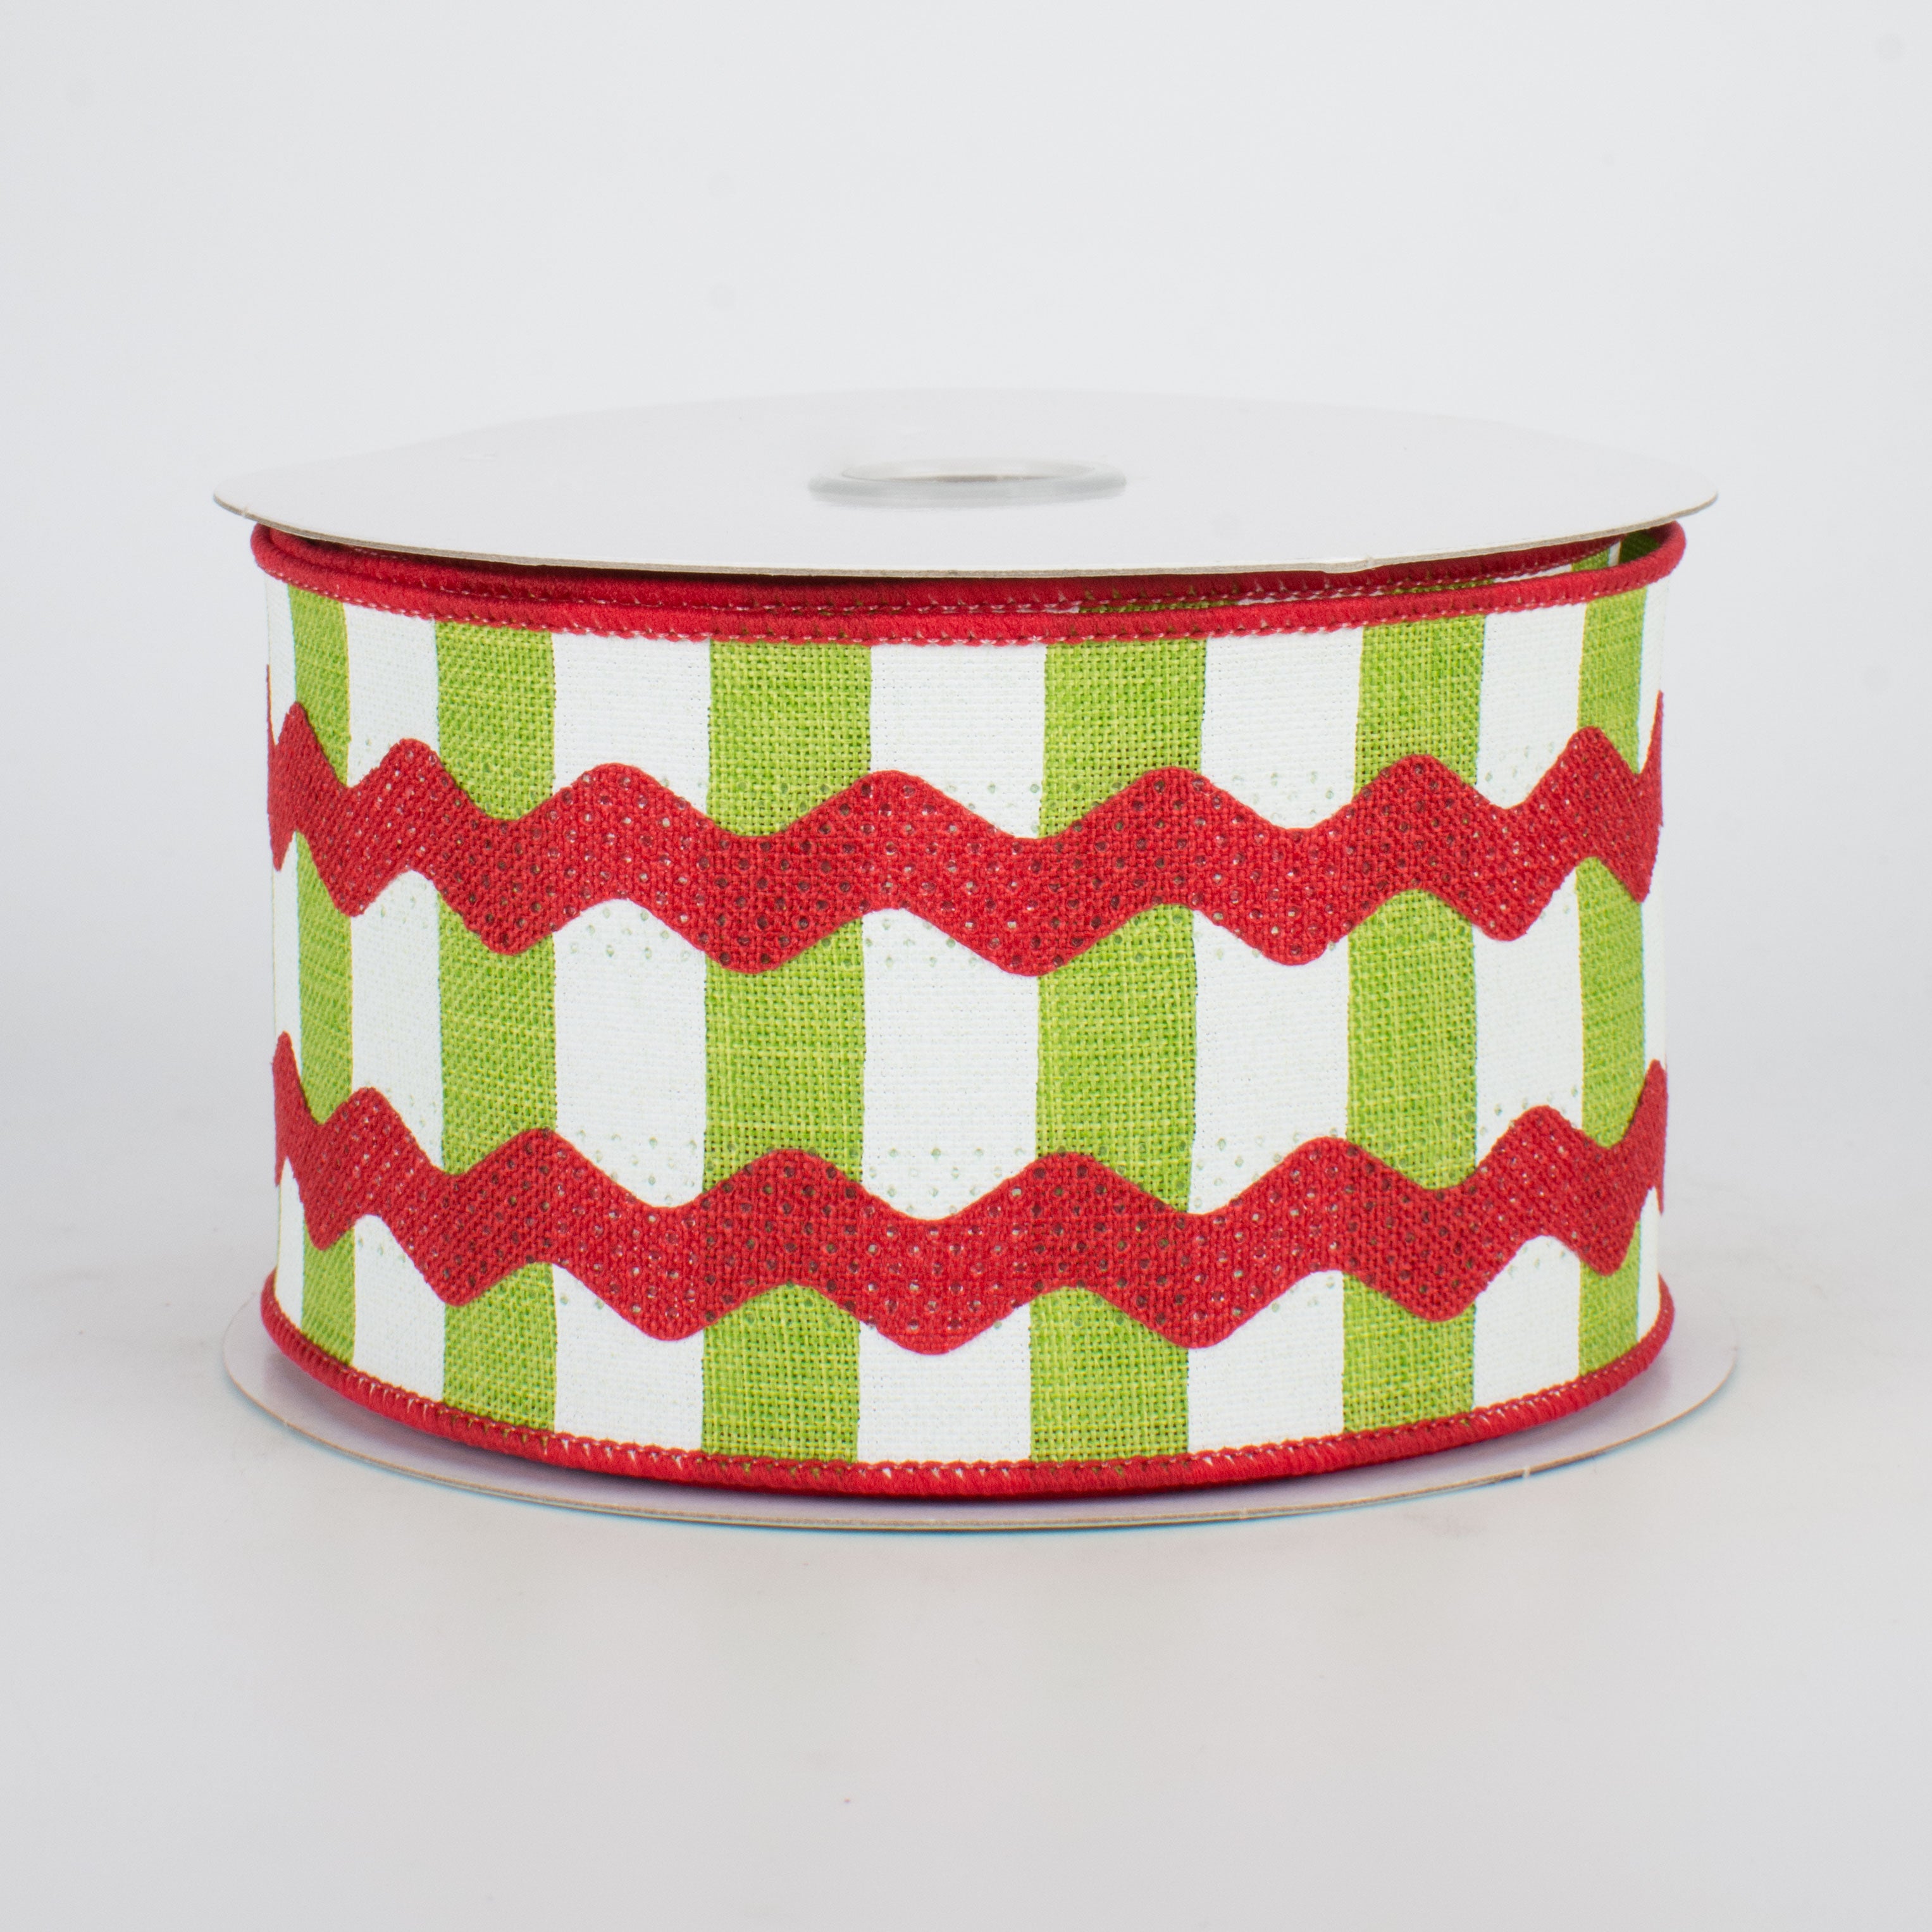 2.5" Ric Rac On Stripes Ribbon: Lime, White, Red (10 Yards)